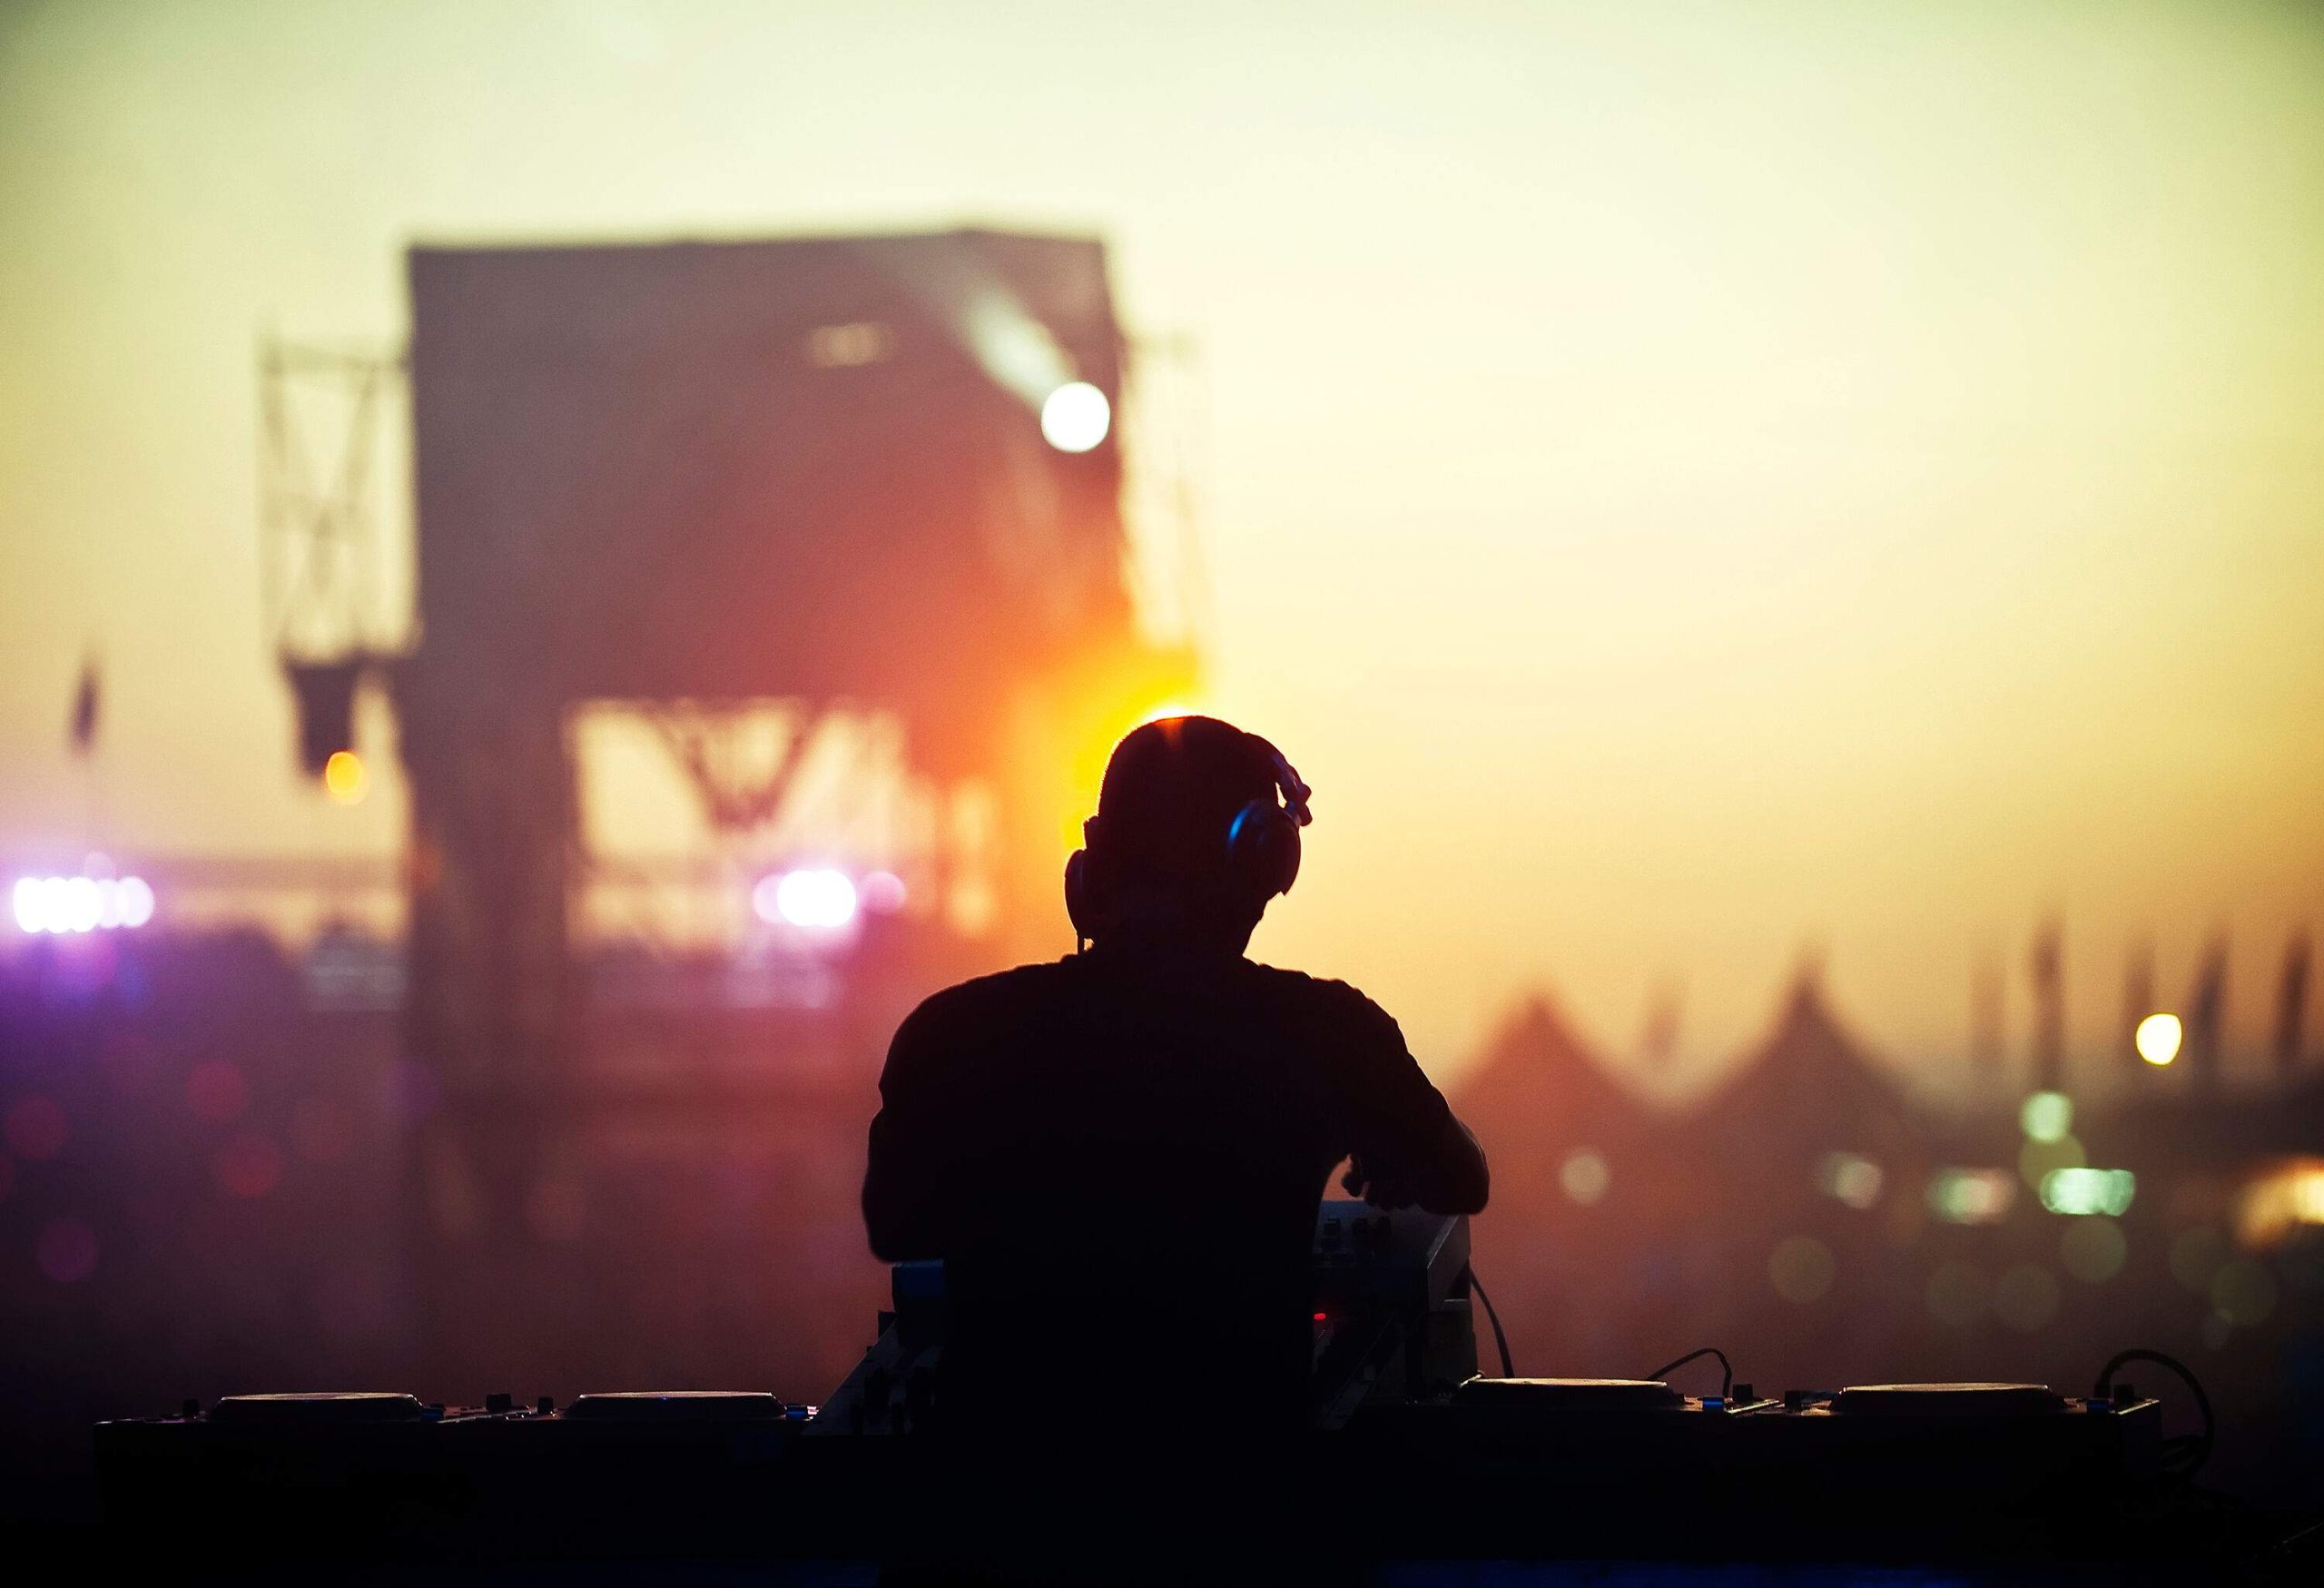 A DJ performing on stage with silhouette of buildings in the background.